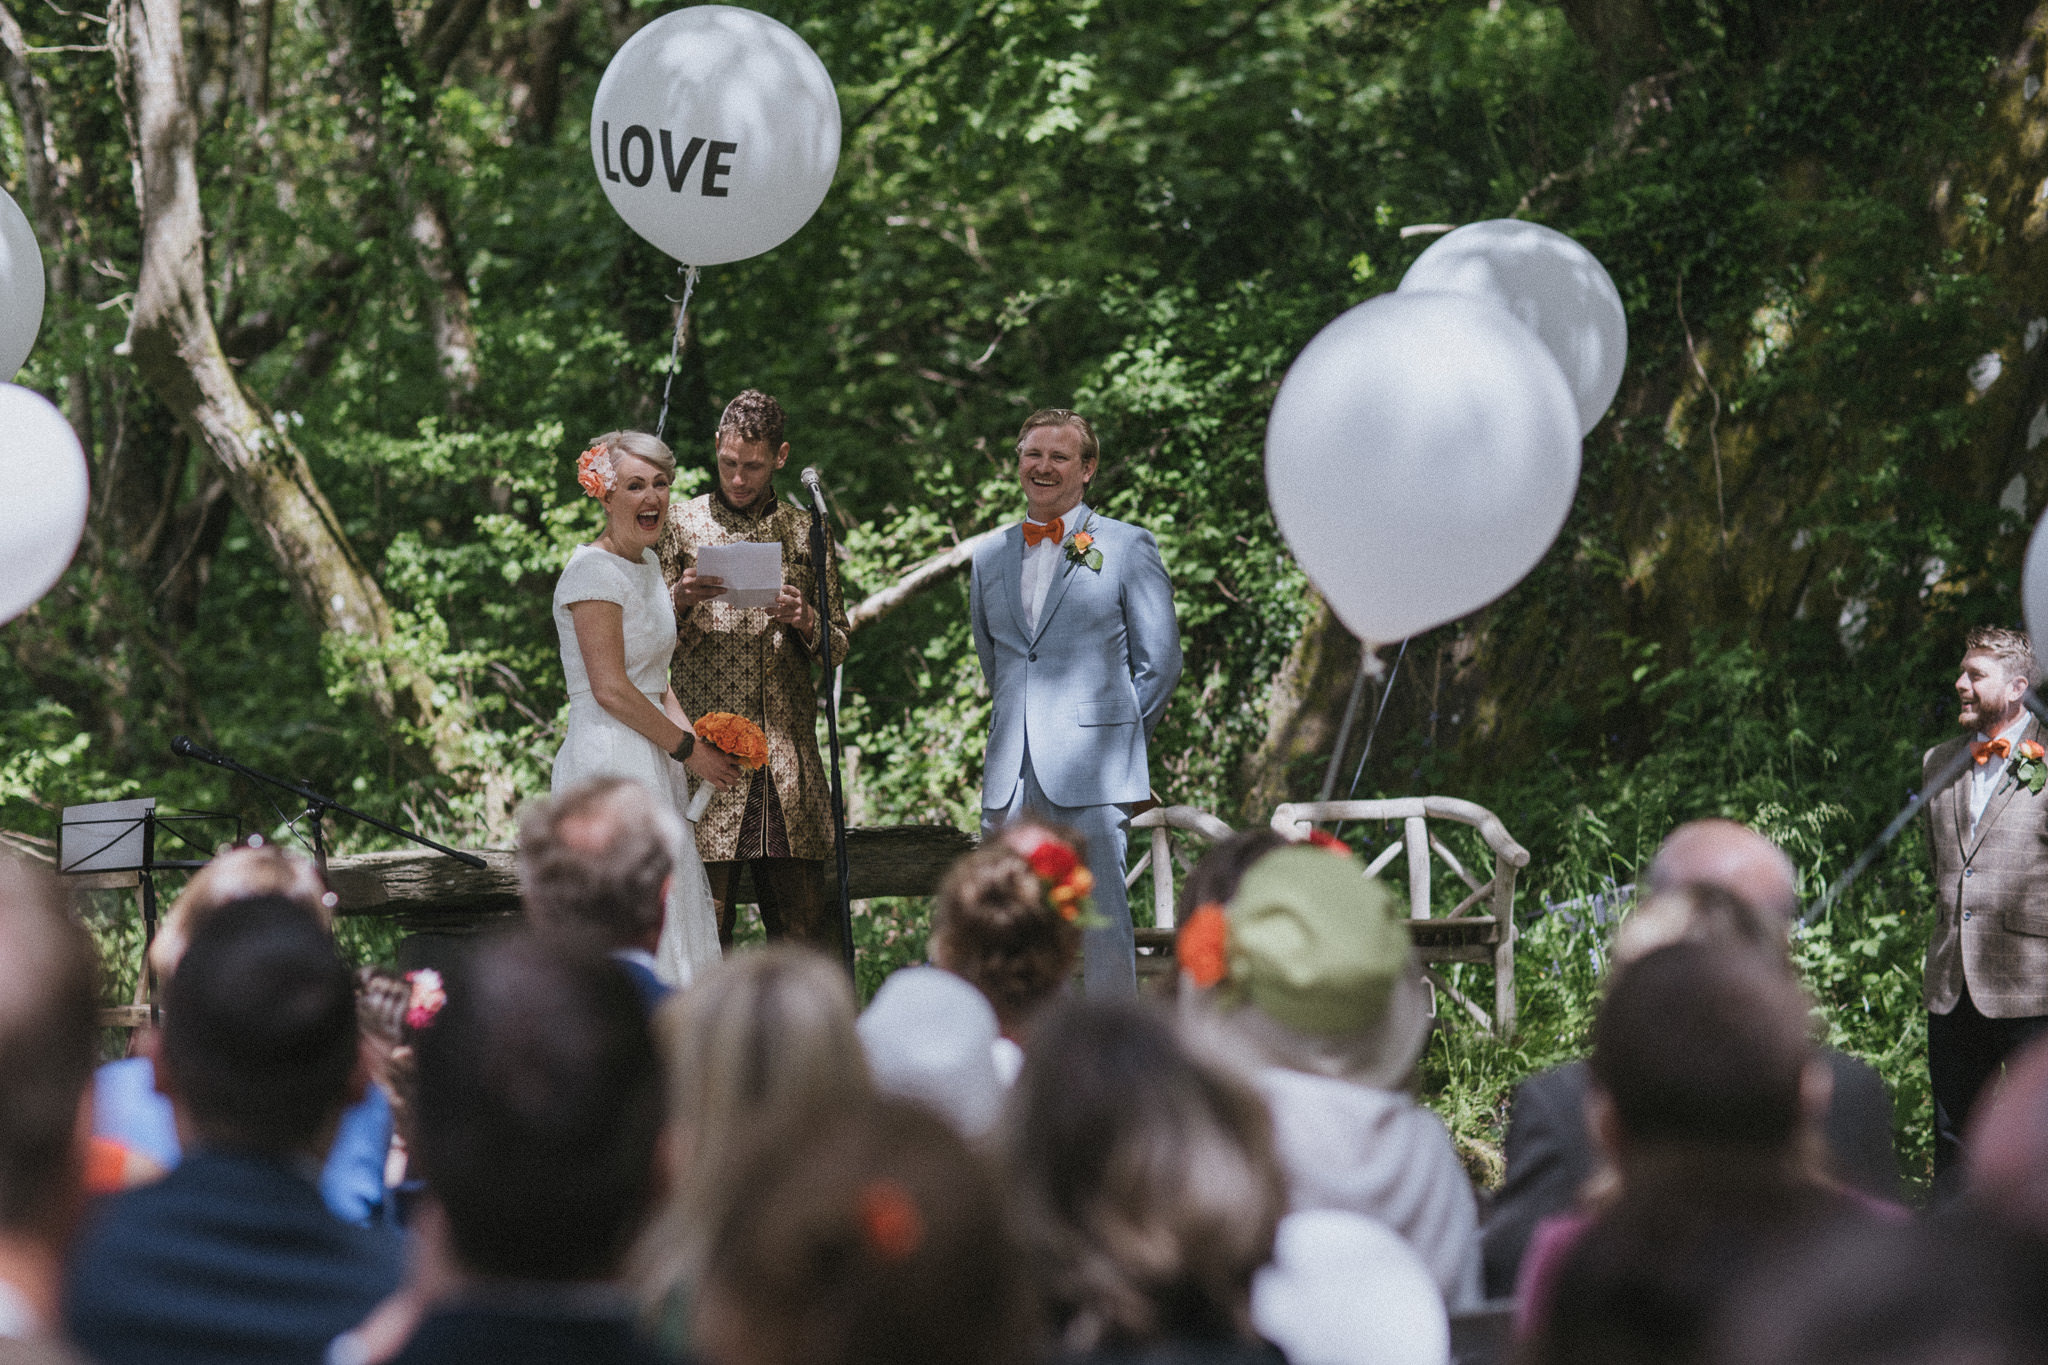 Outdoors open air wedding ceremony at Fforest Farm, Pembrokeshire